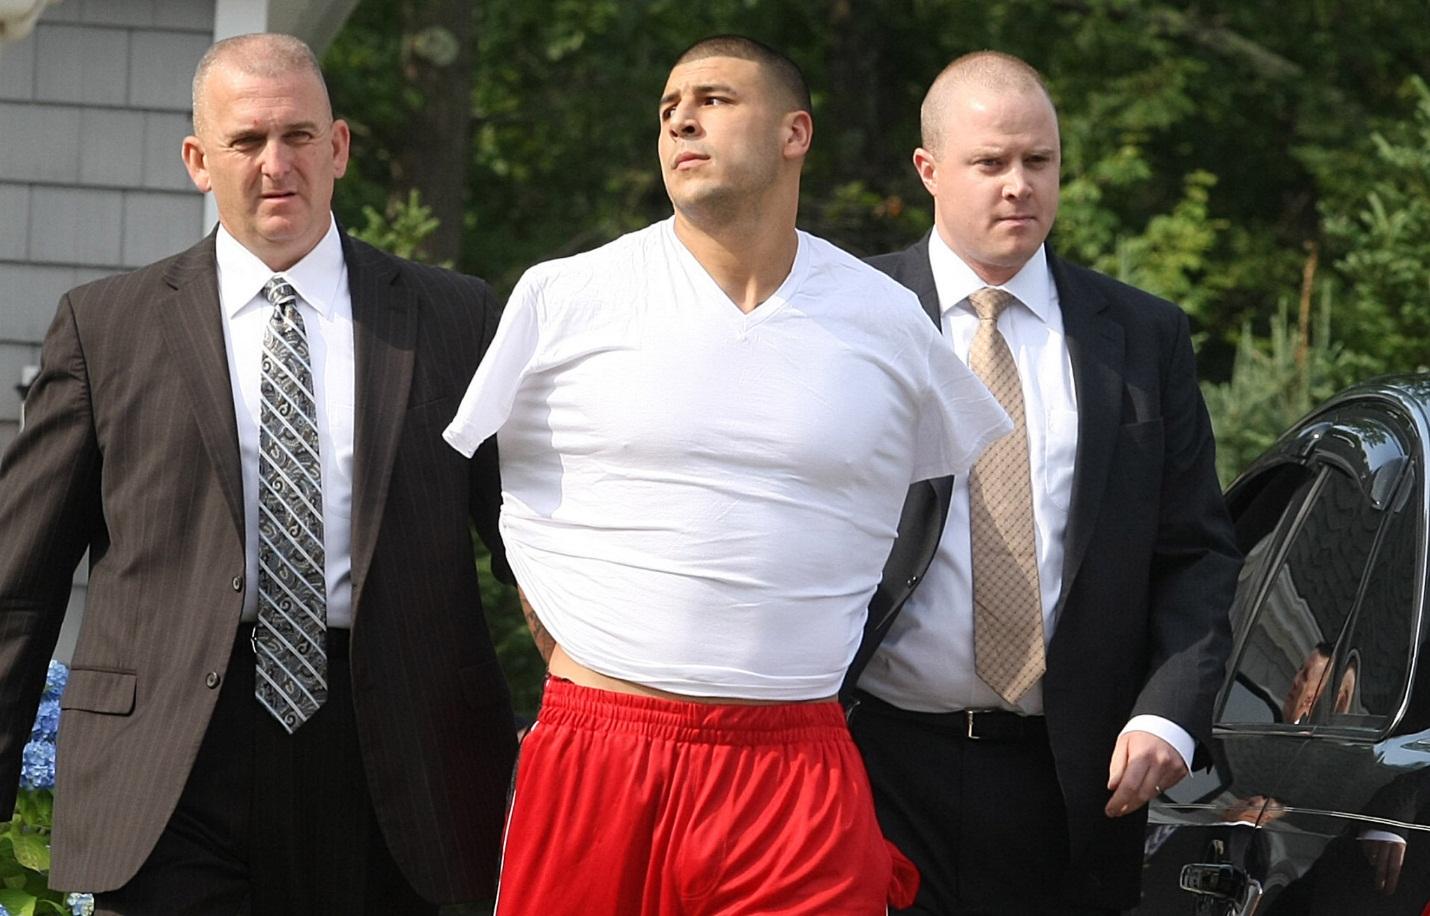 Former Patriots Tight End Is Charged With Murder - The New York Times